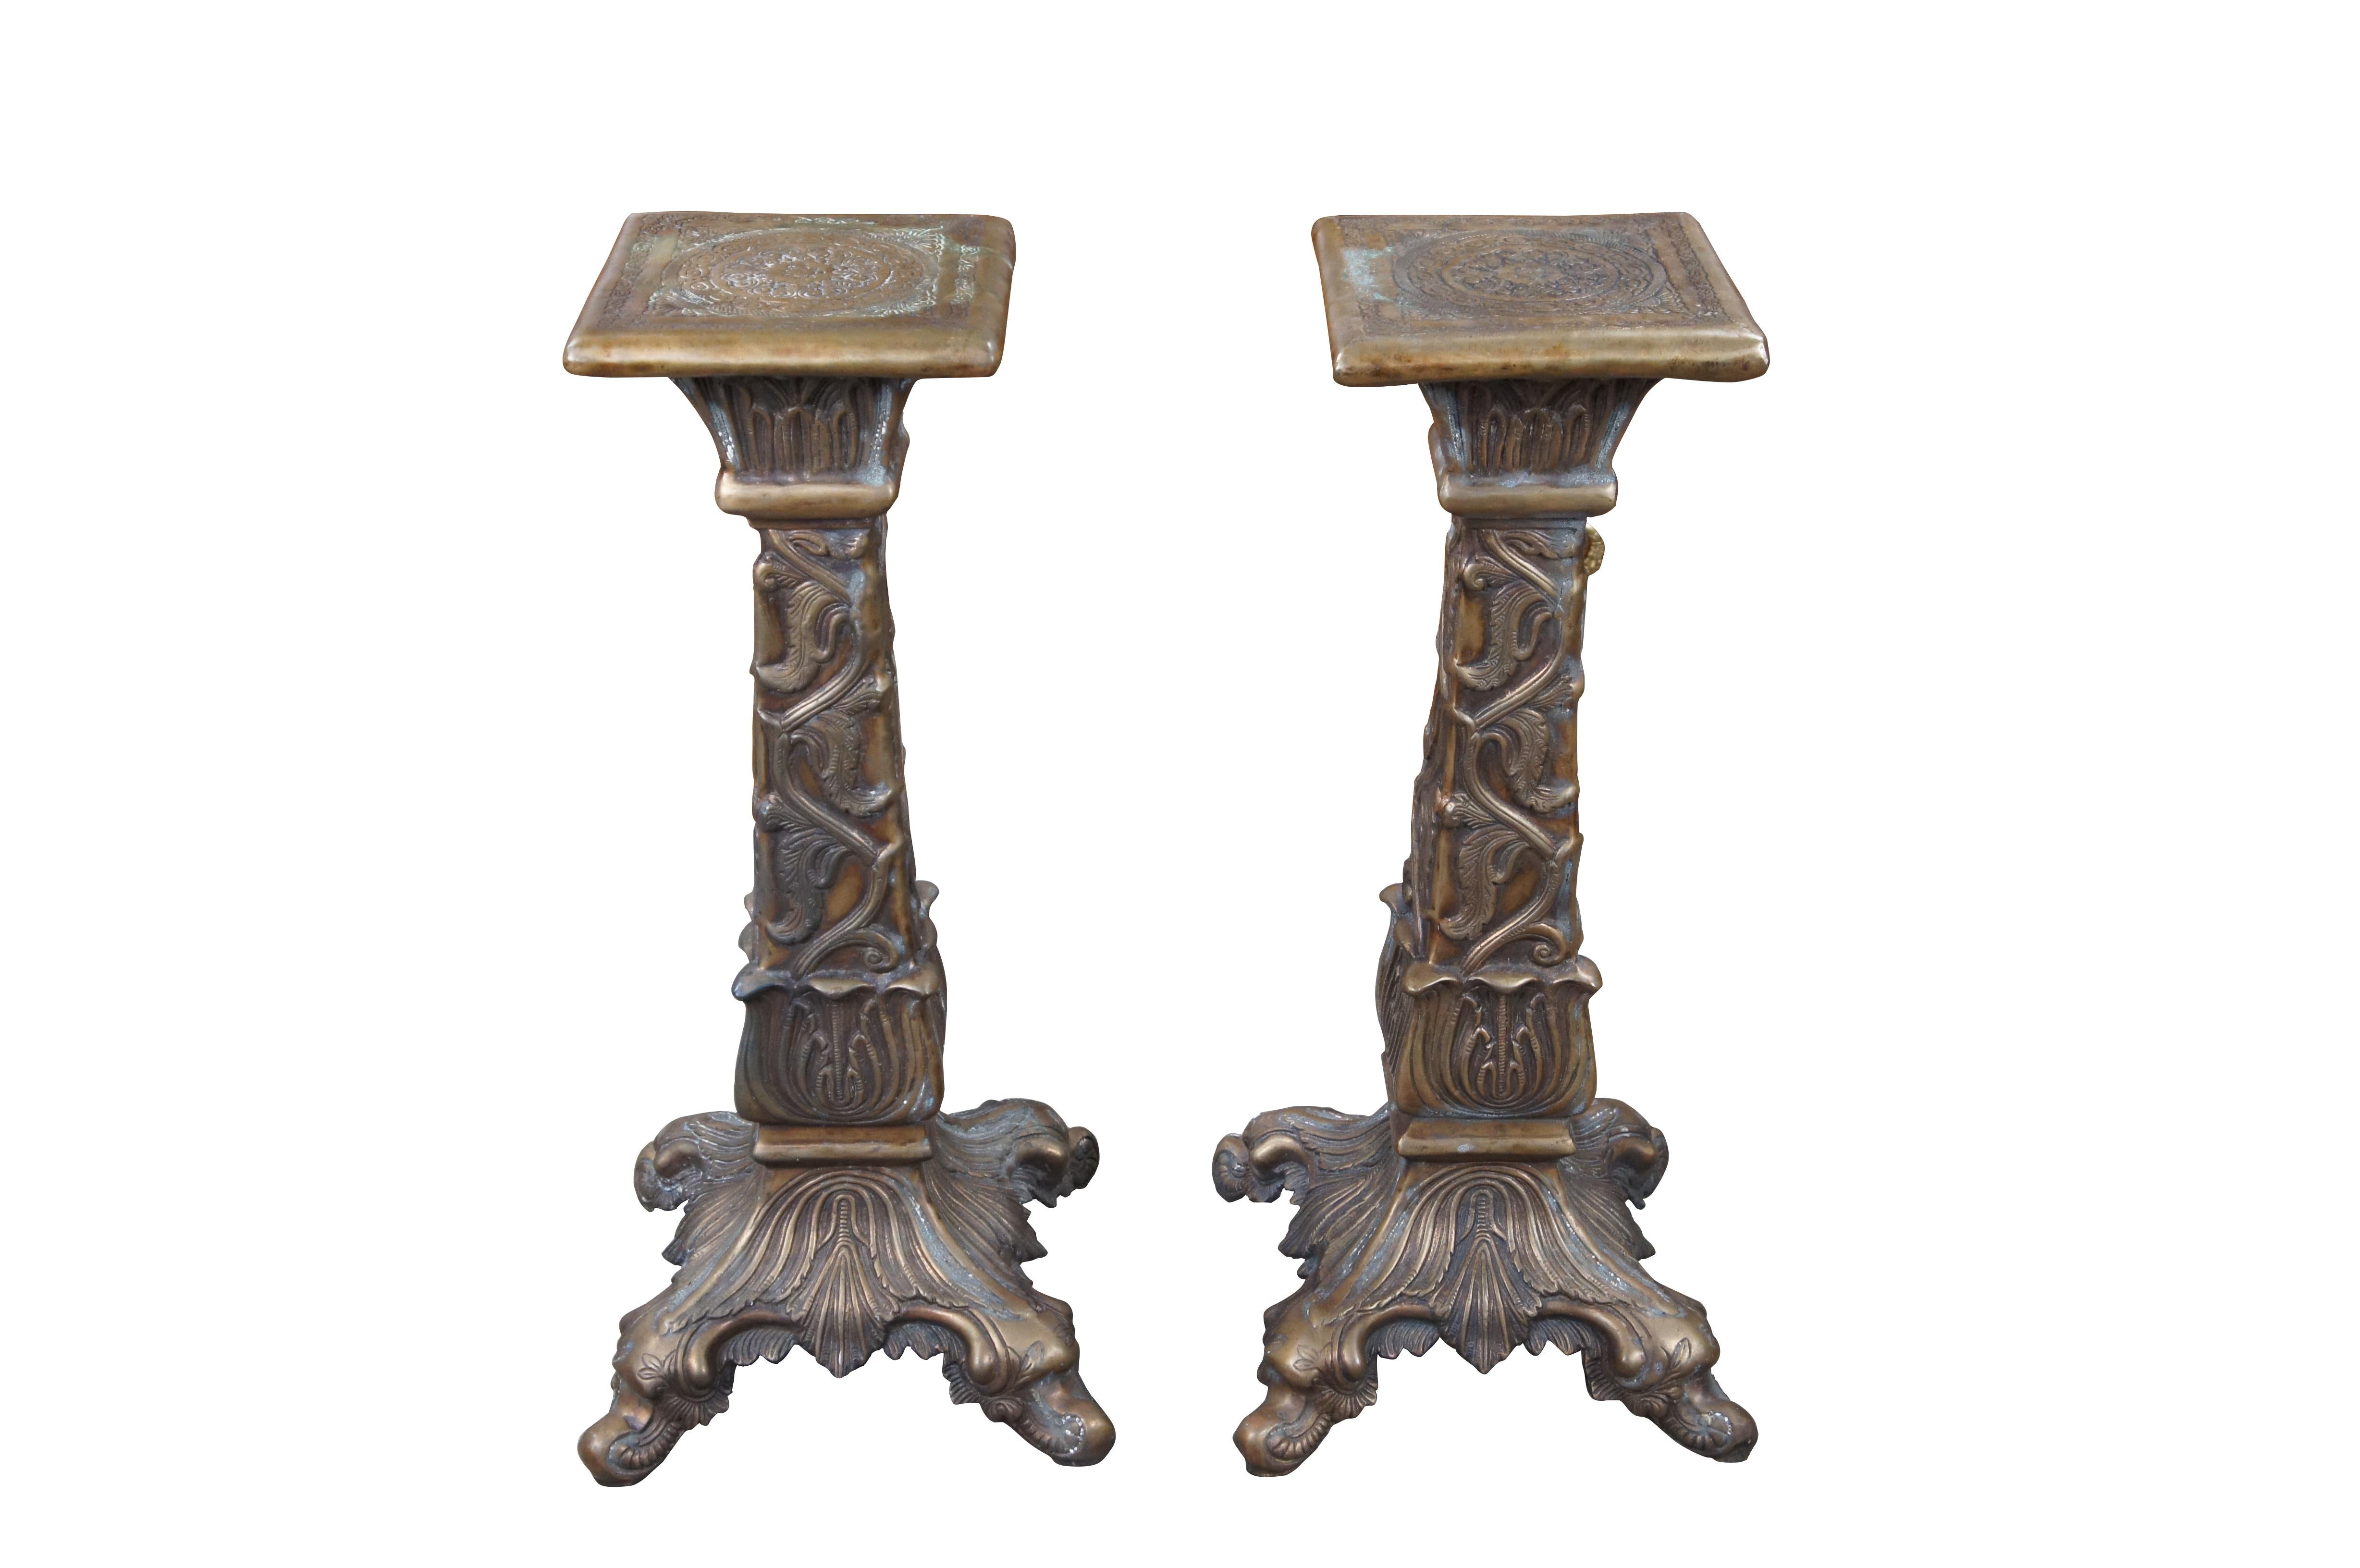 Pair bronze candle stands or sculpture pedestals. Features foliate and acanthus low relief details over an ornate four legged base. The top of each is embossed with geometric detail.

Dimensions:
12